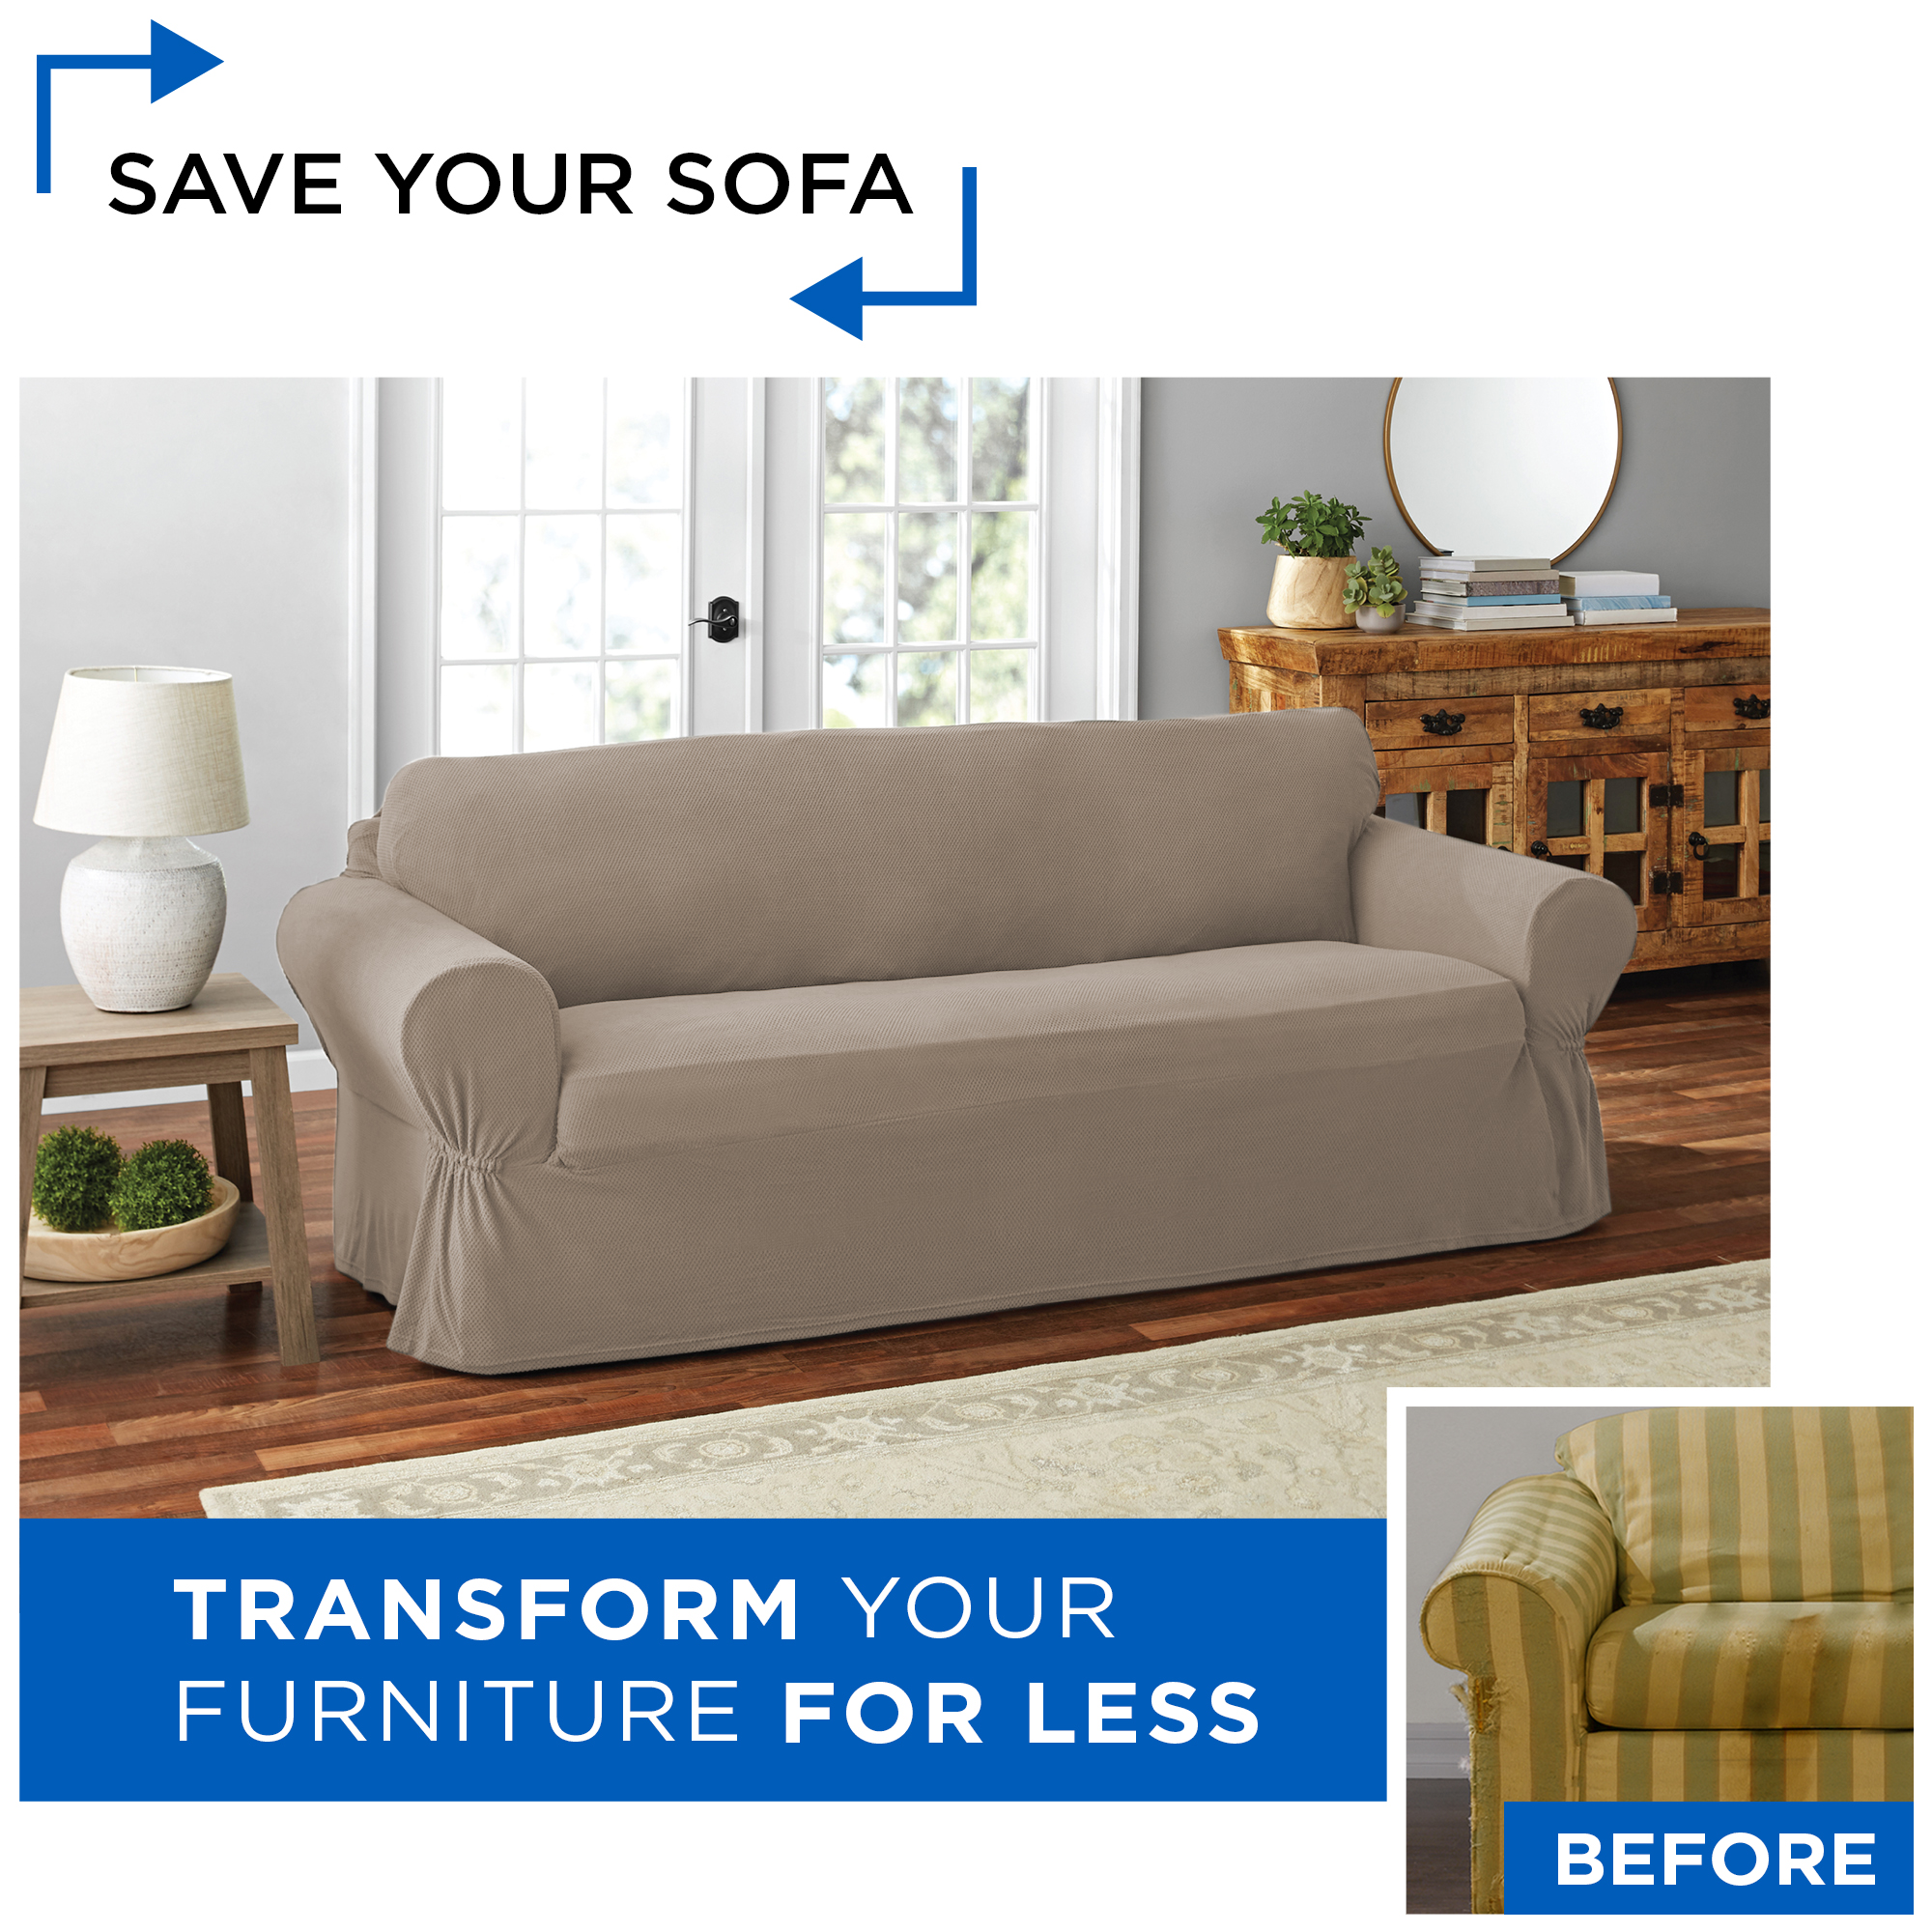 Mainstays Pixel 1-Piece Stretch Sofa Slipcover, Sand - image 2 of 7